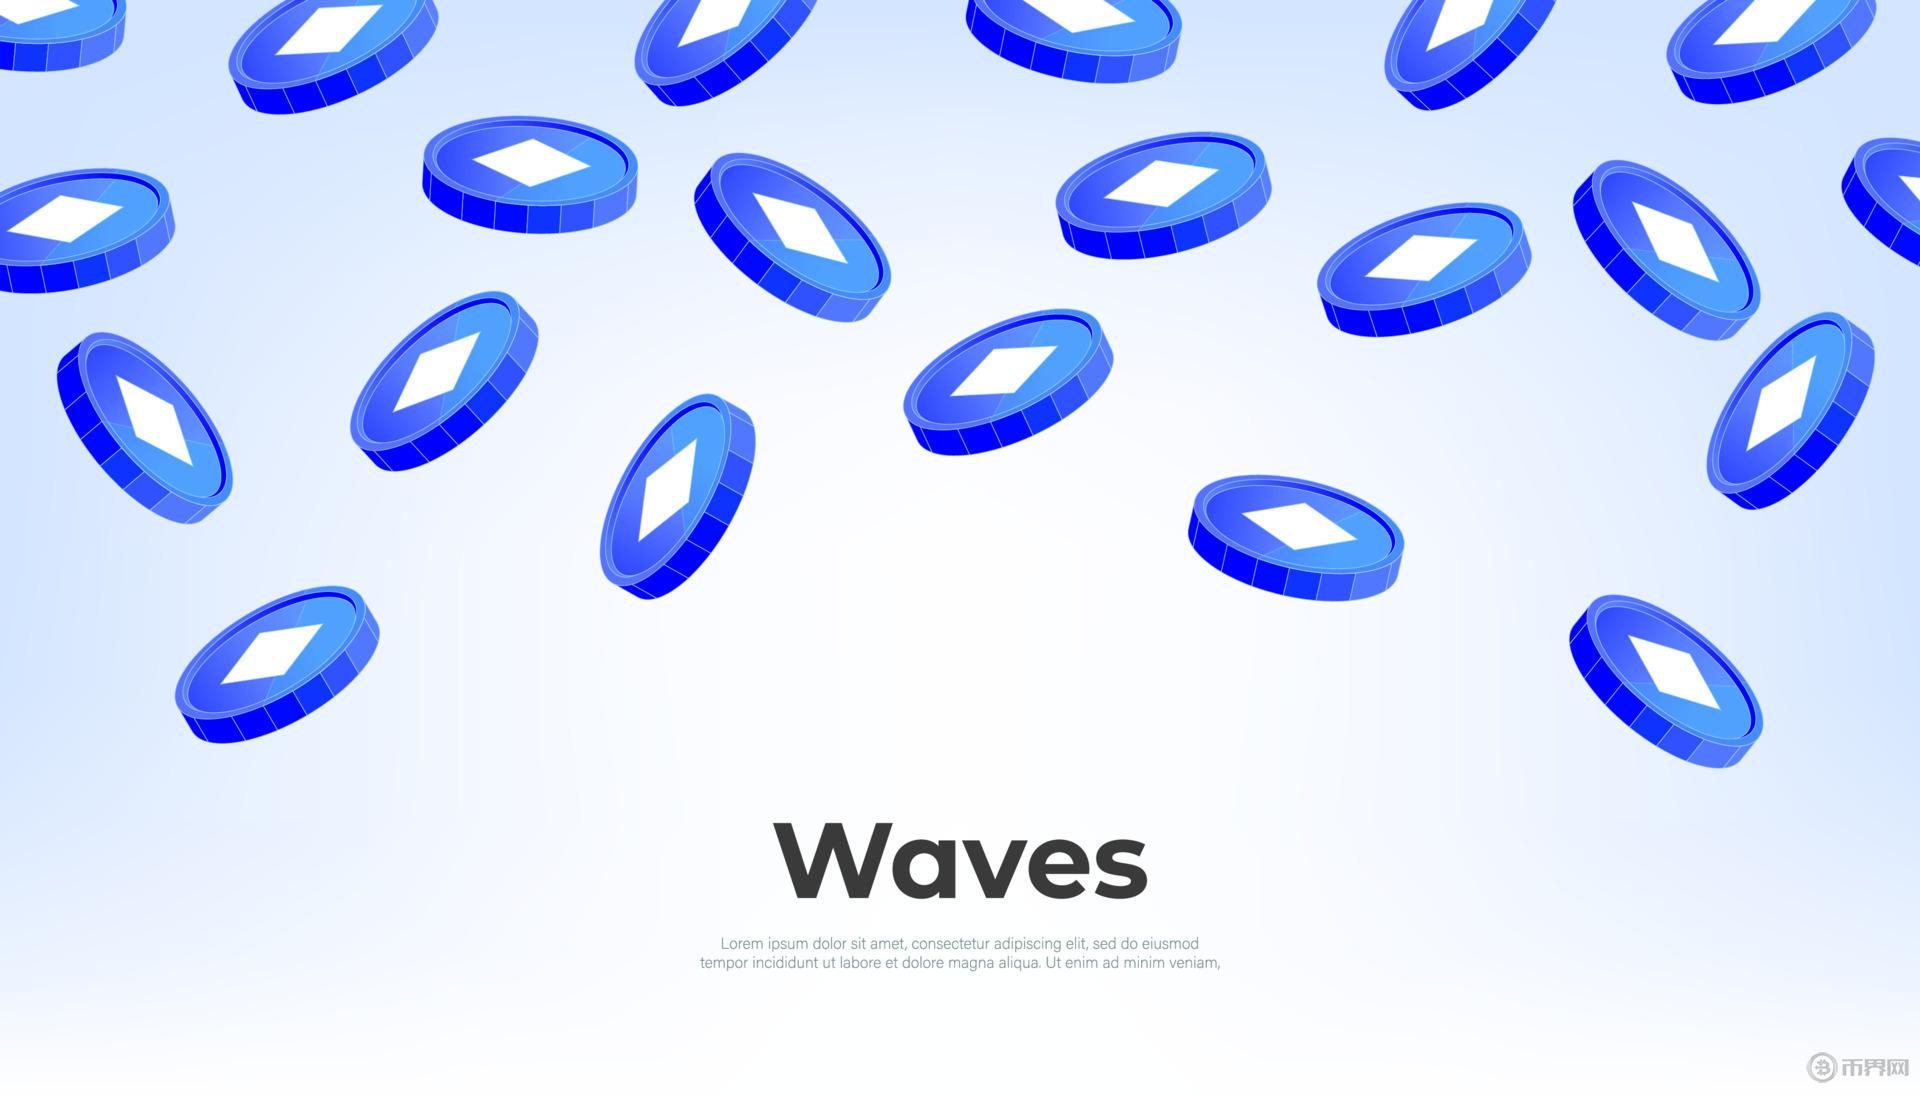 waves-coin-falling-from-the-sky-waves-cryptocurrency-concept-banner-background-vector.jpg